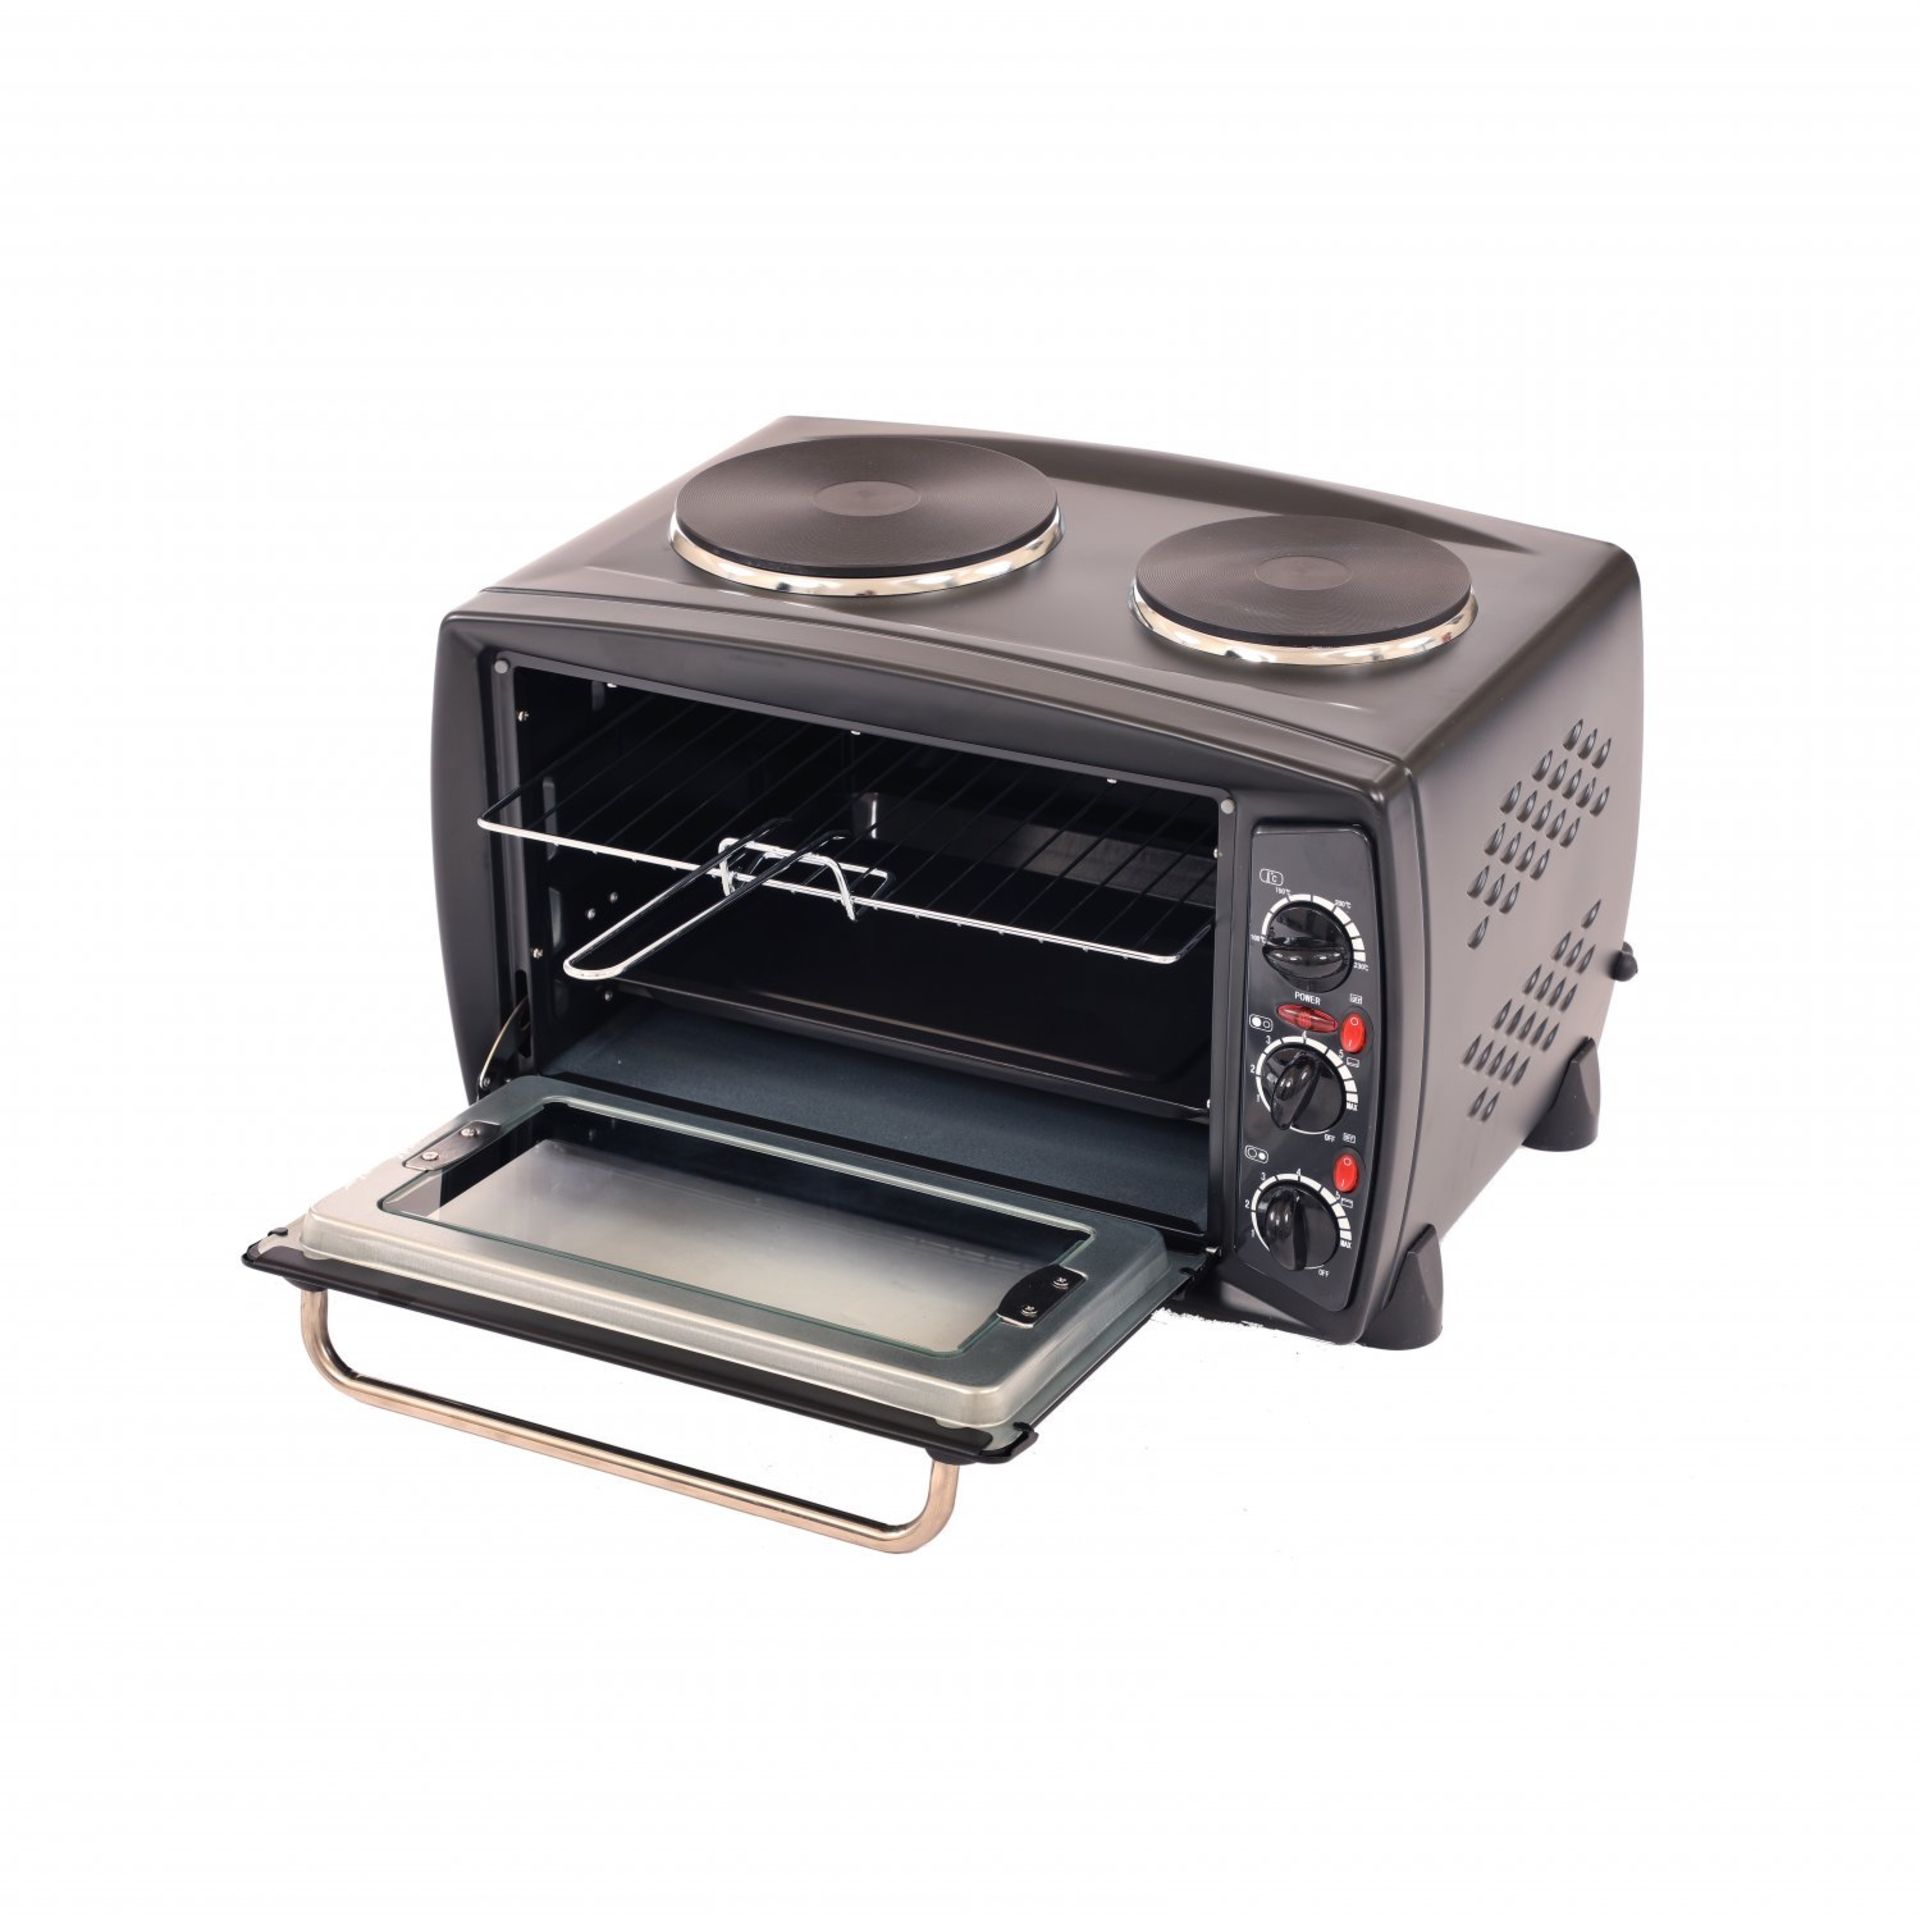 (SK9) Mini Oven c/w Hot Plates And Grill The 26 litre mini oven & grill with double hob is l... - Image 3 of 3